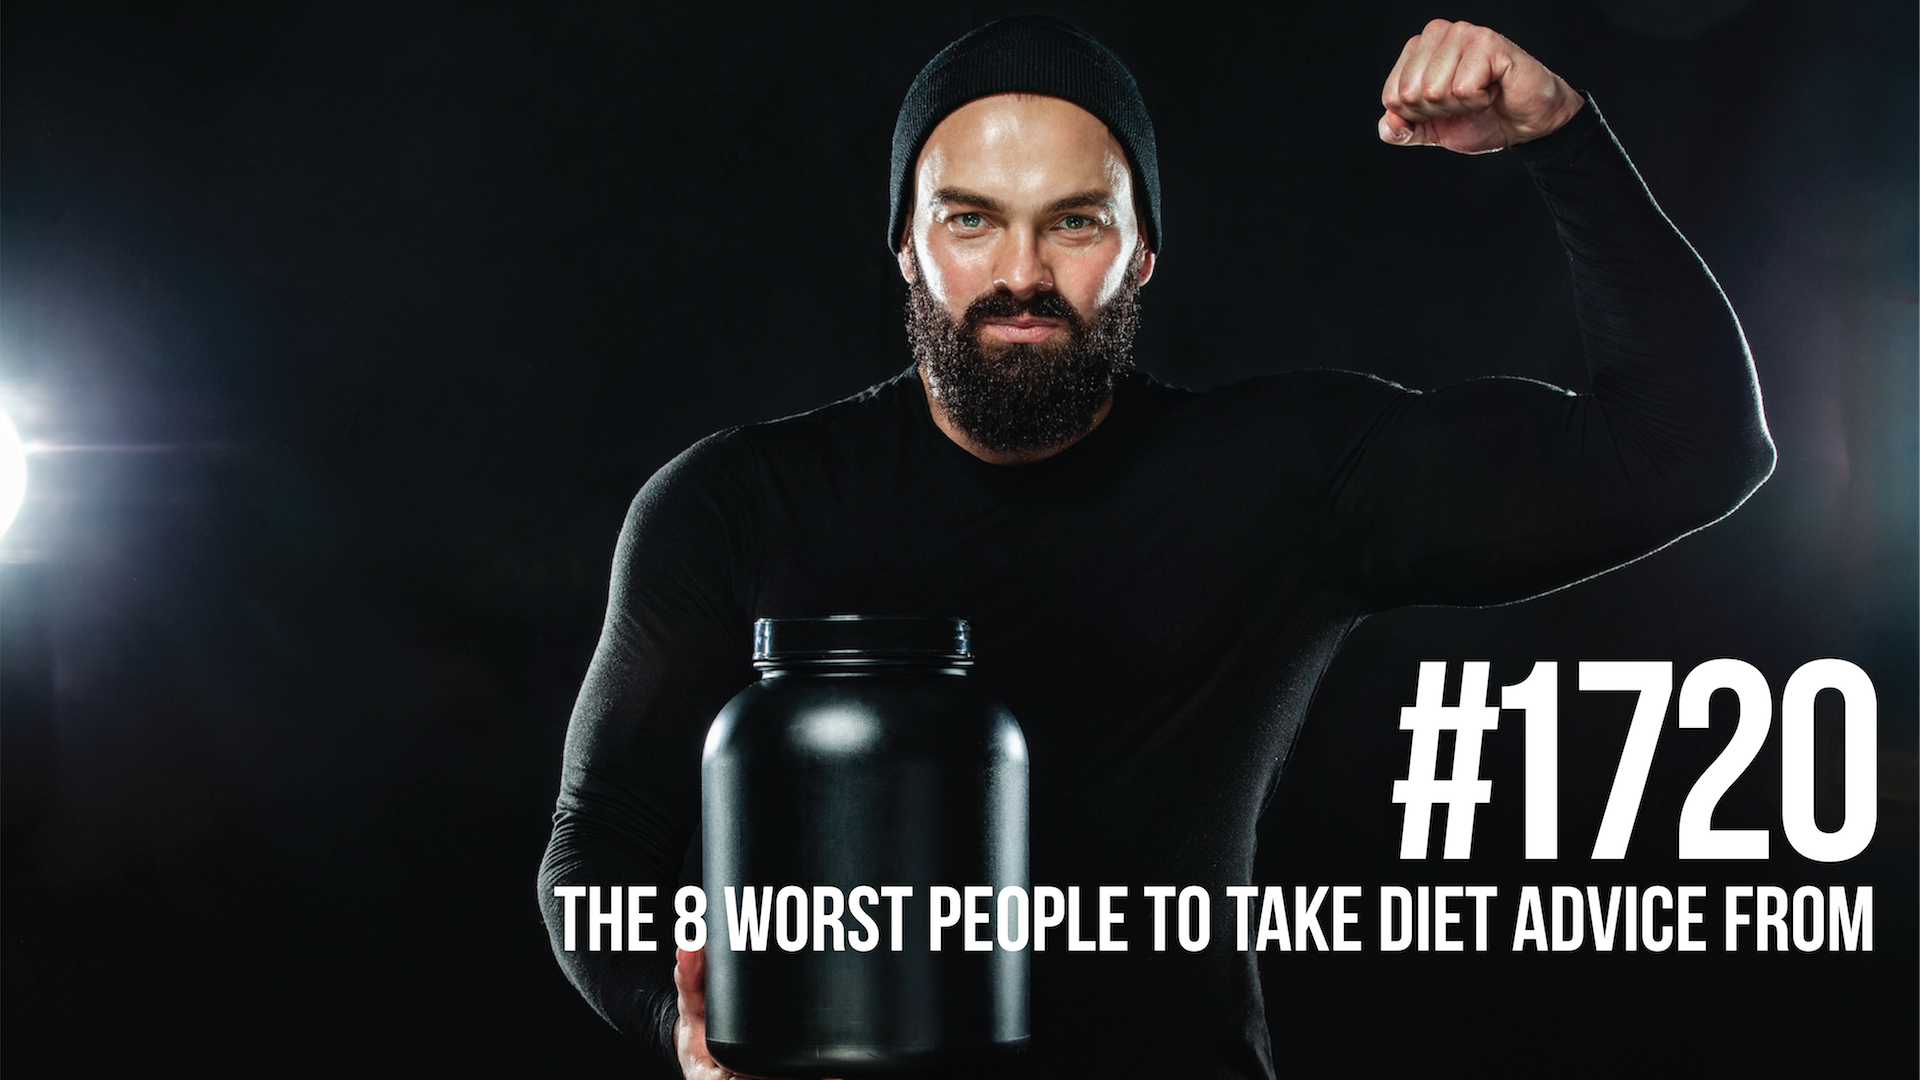 1720: The 8 Worst People to Take Diet Advice From